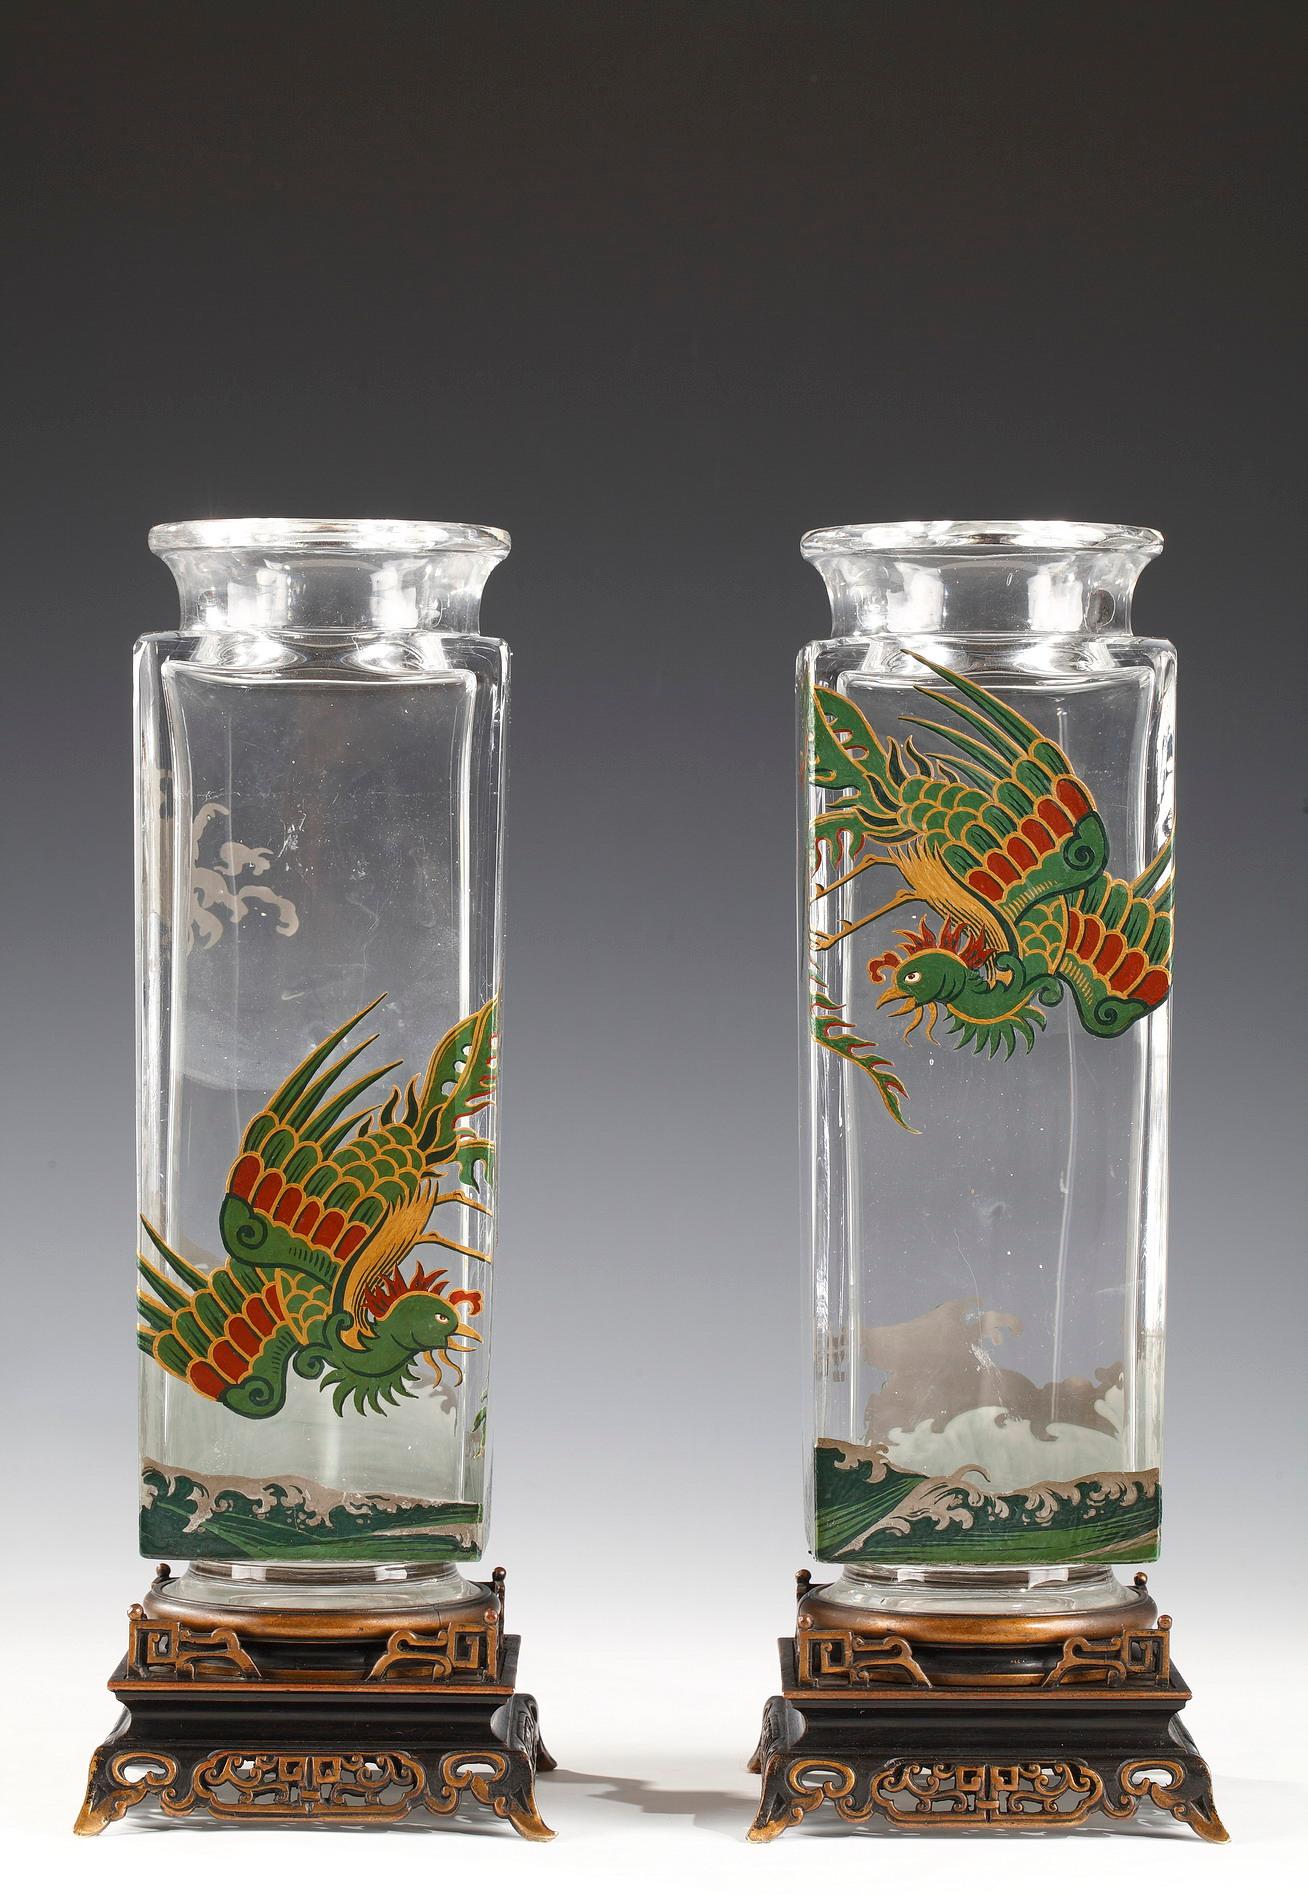 Elegant pair of square section vases attributed to Baccarat, in enameled crystal with polychrome decoration of birds of paradise, resting on an openwork patinated and gilded bronze base with Japanese style motifs.

Between 1764 and 1860, with rare